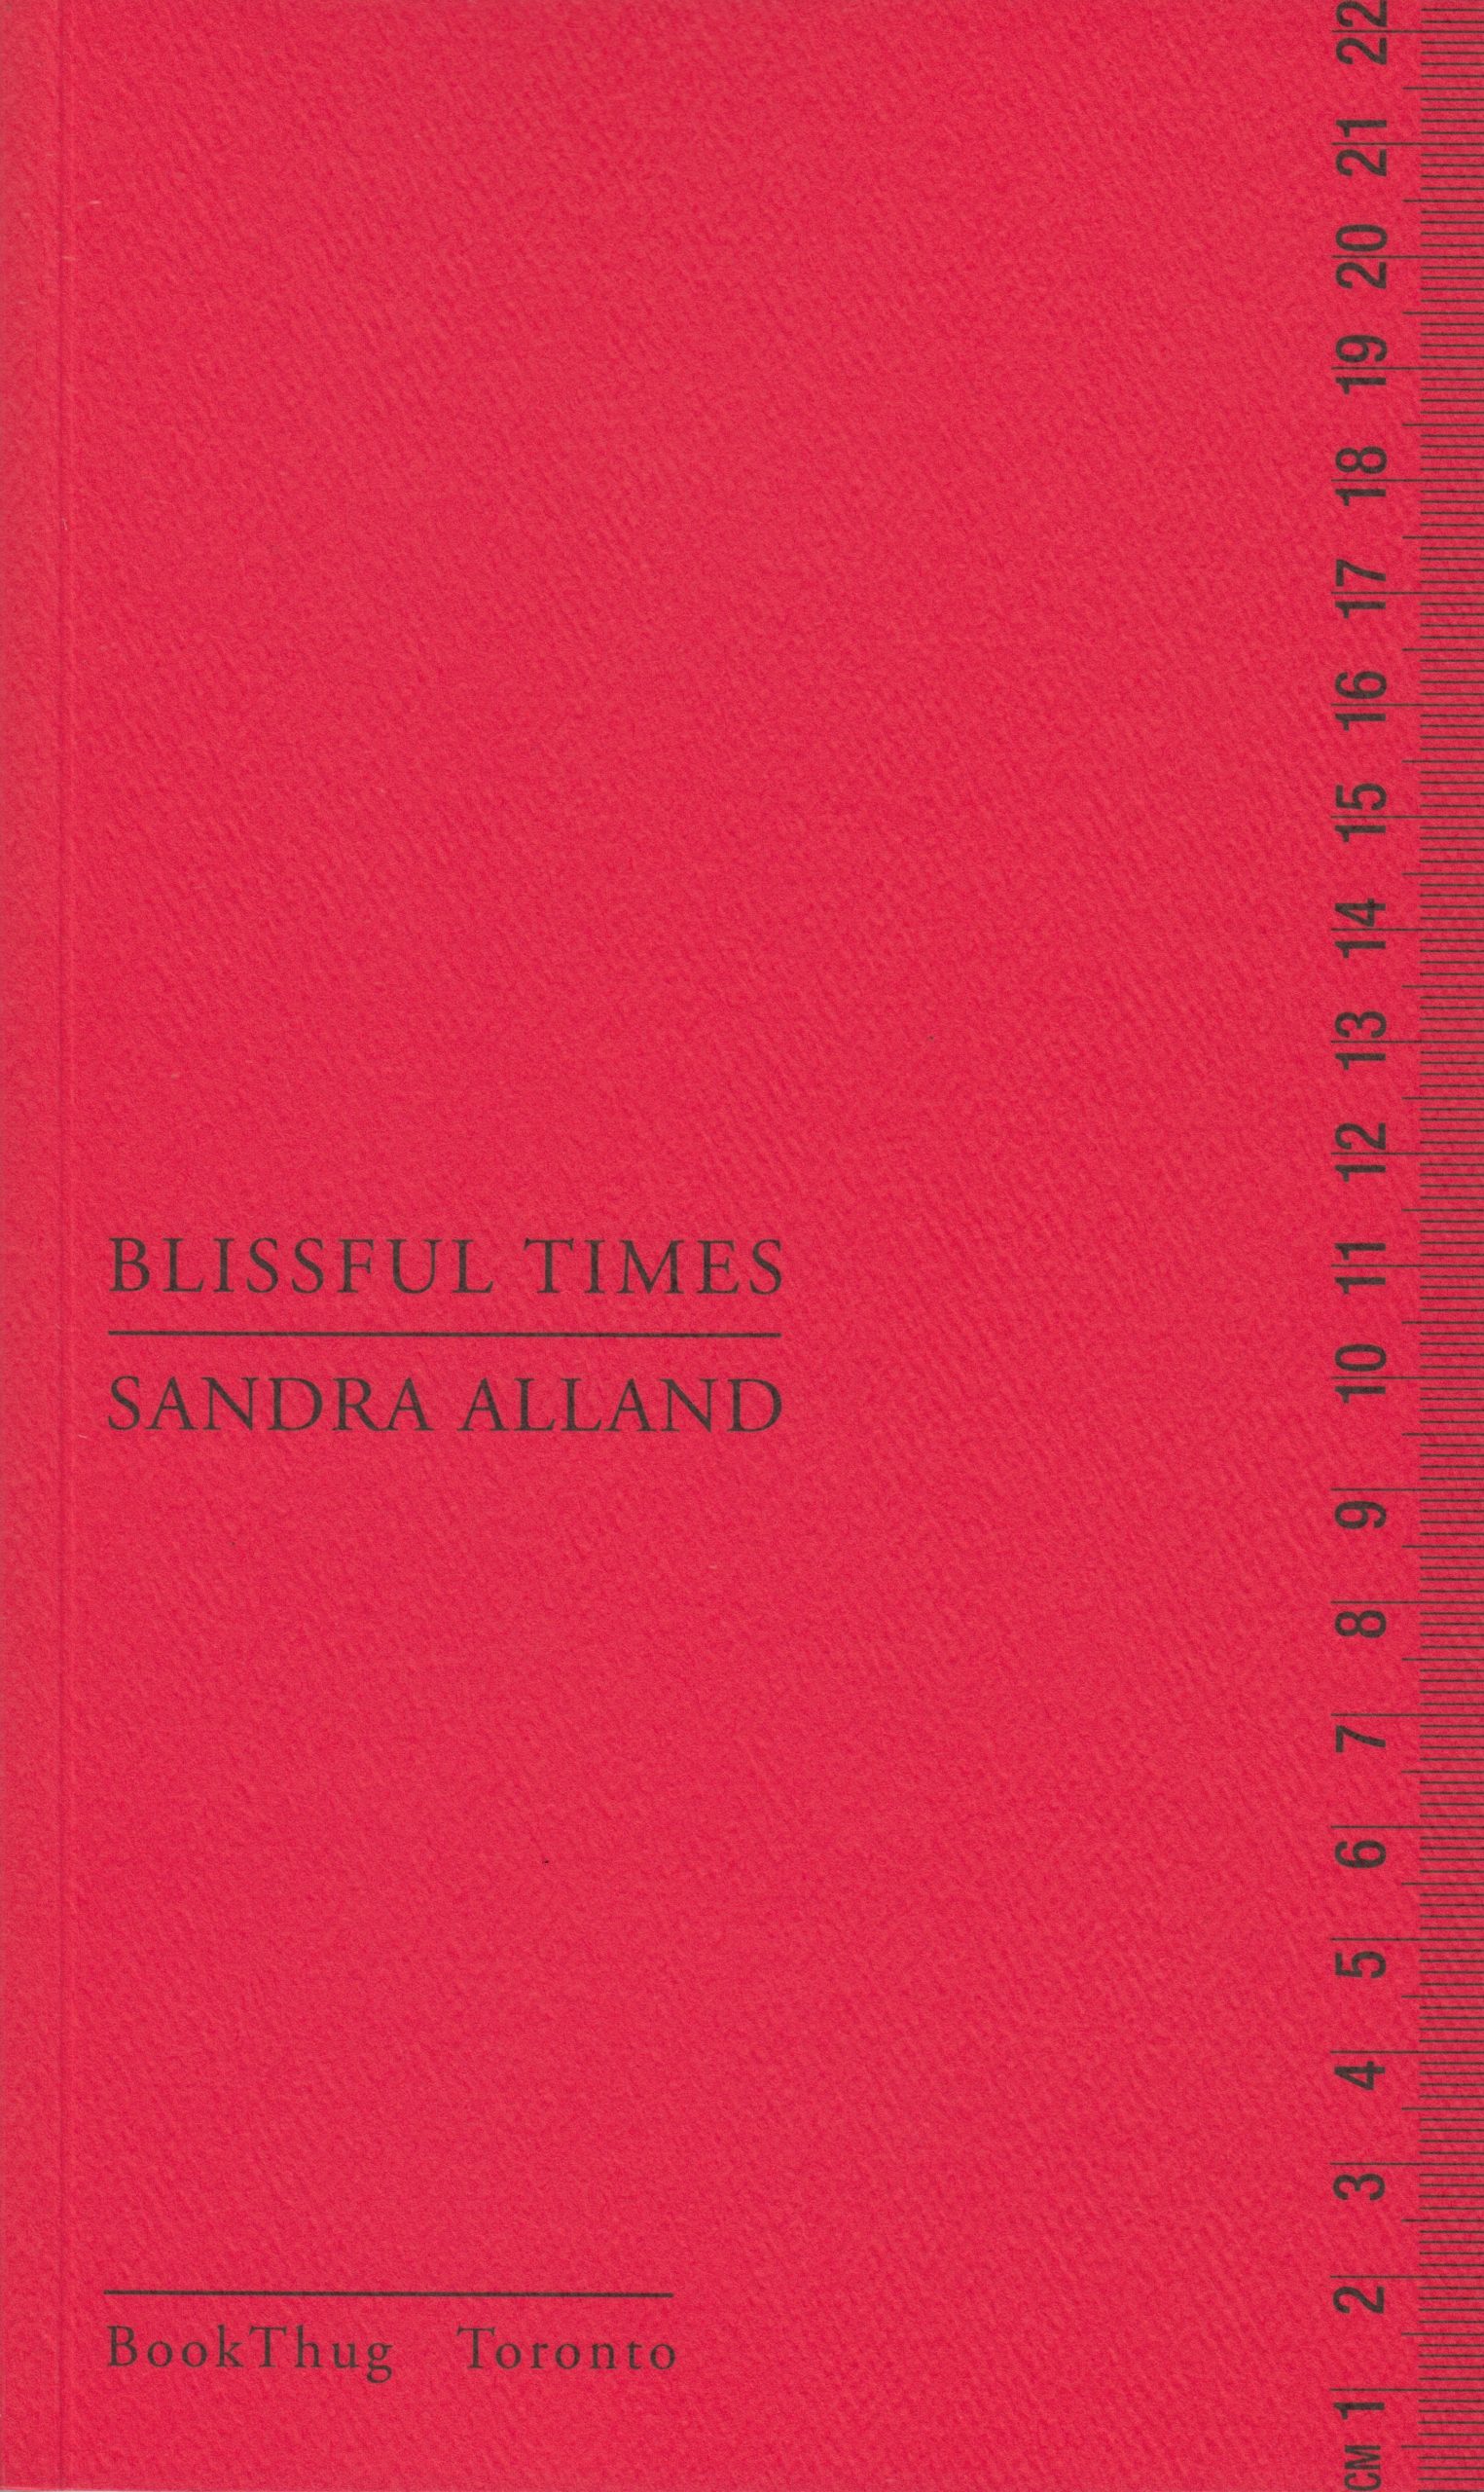 The cover of Blissful Times by Sandra Alland. The cover is red with black text. On the right margin is a ruler in centimetres.